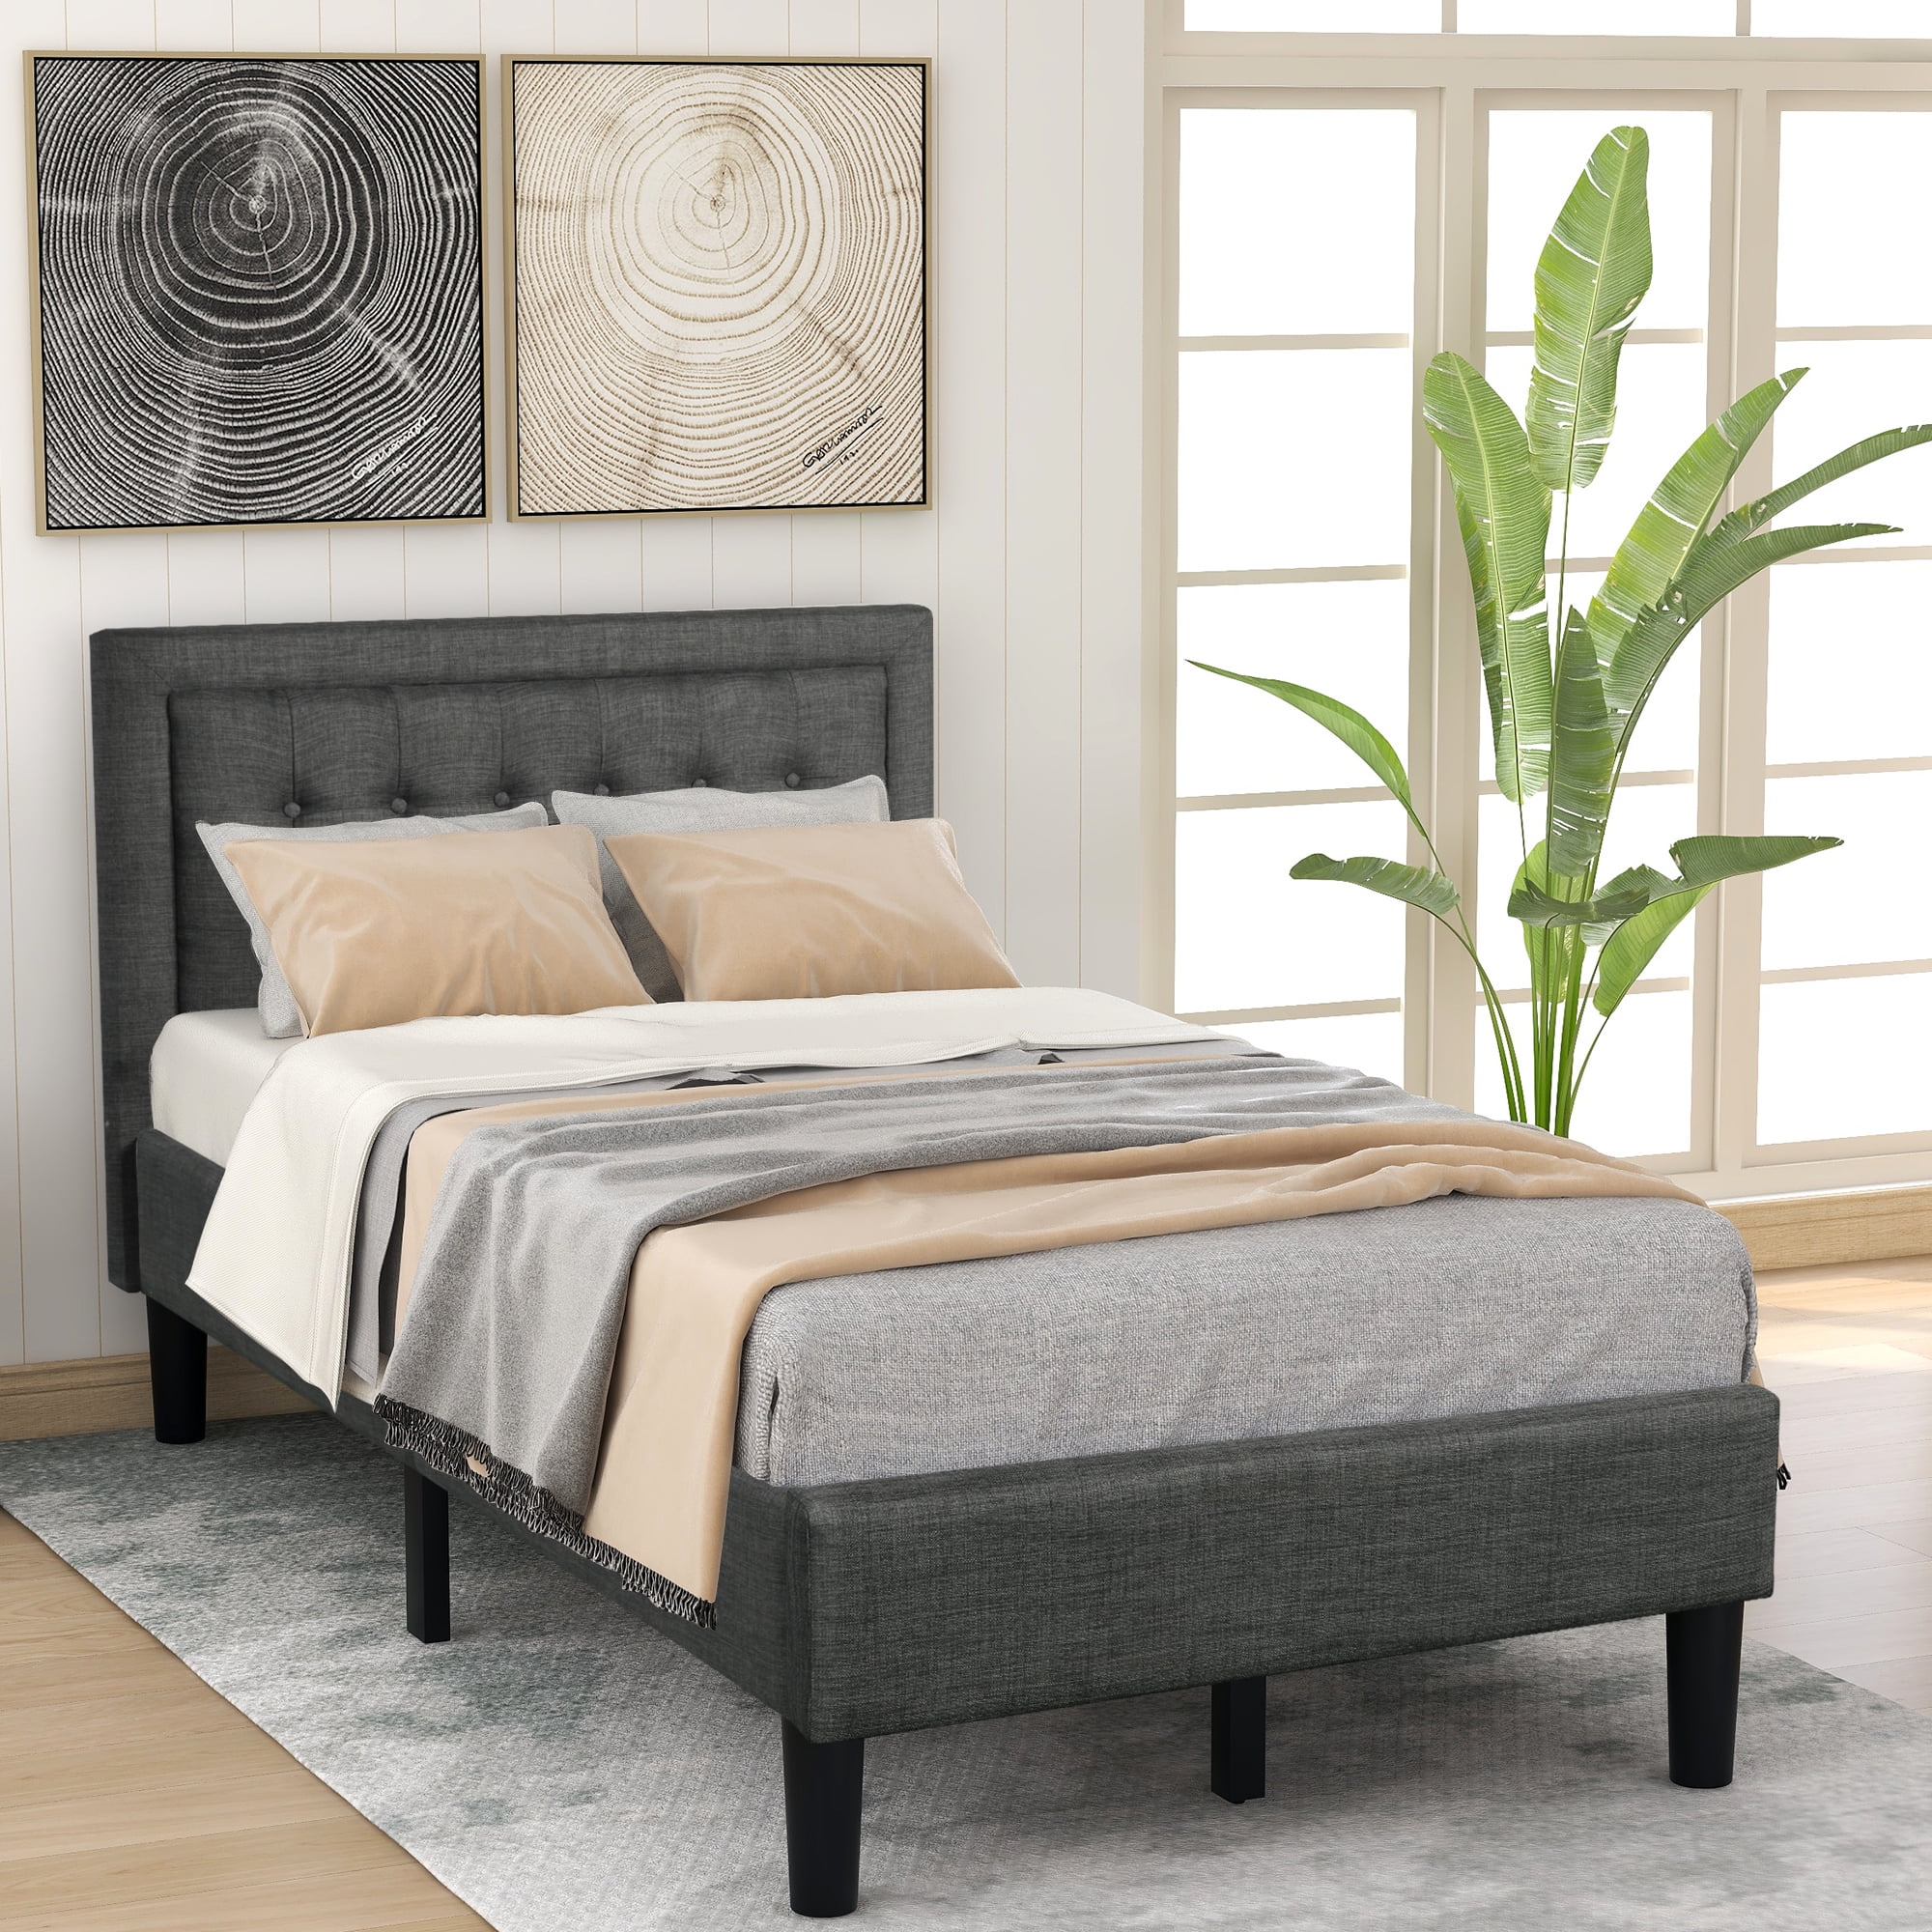 Buy Modern Upholstered Platform Heavy Duty Twin Bed Frame with